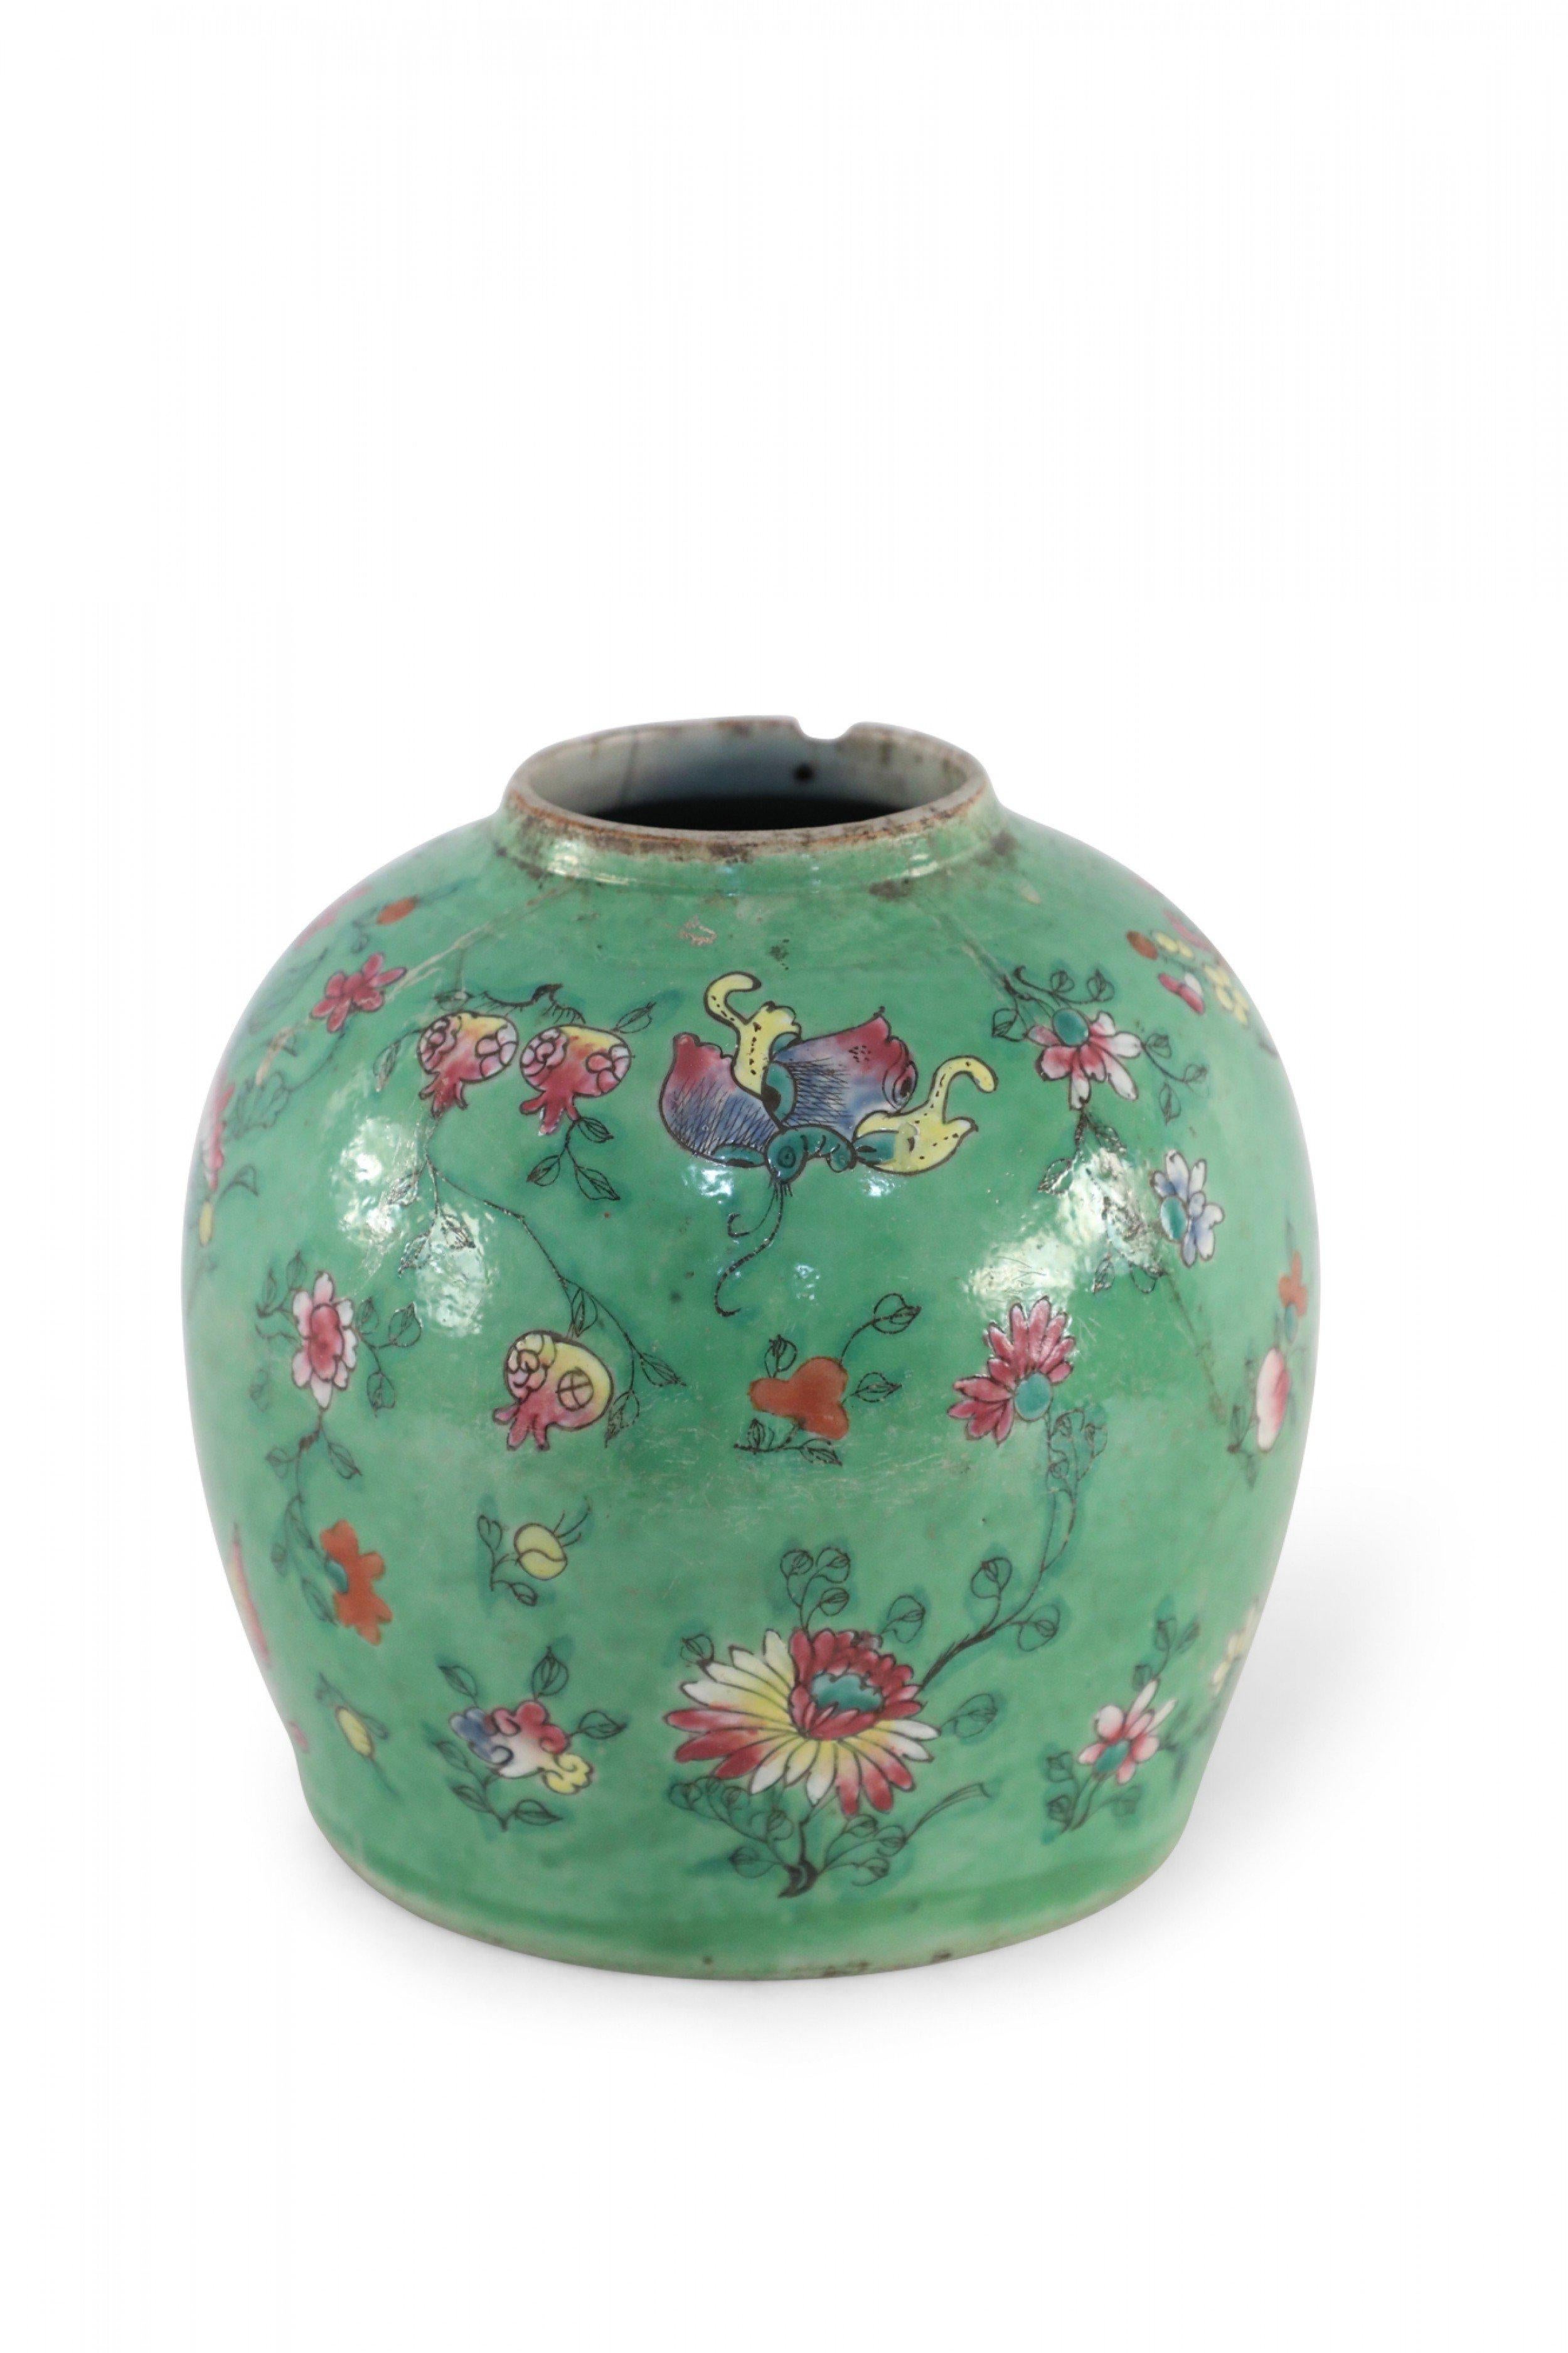 20th Century Chinese Green and Floral Porcelain Watermelon Jar